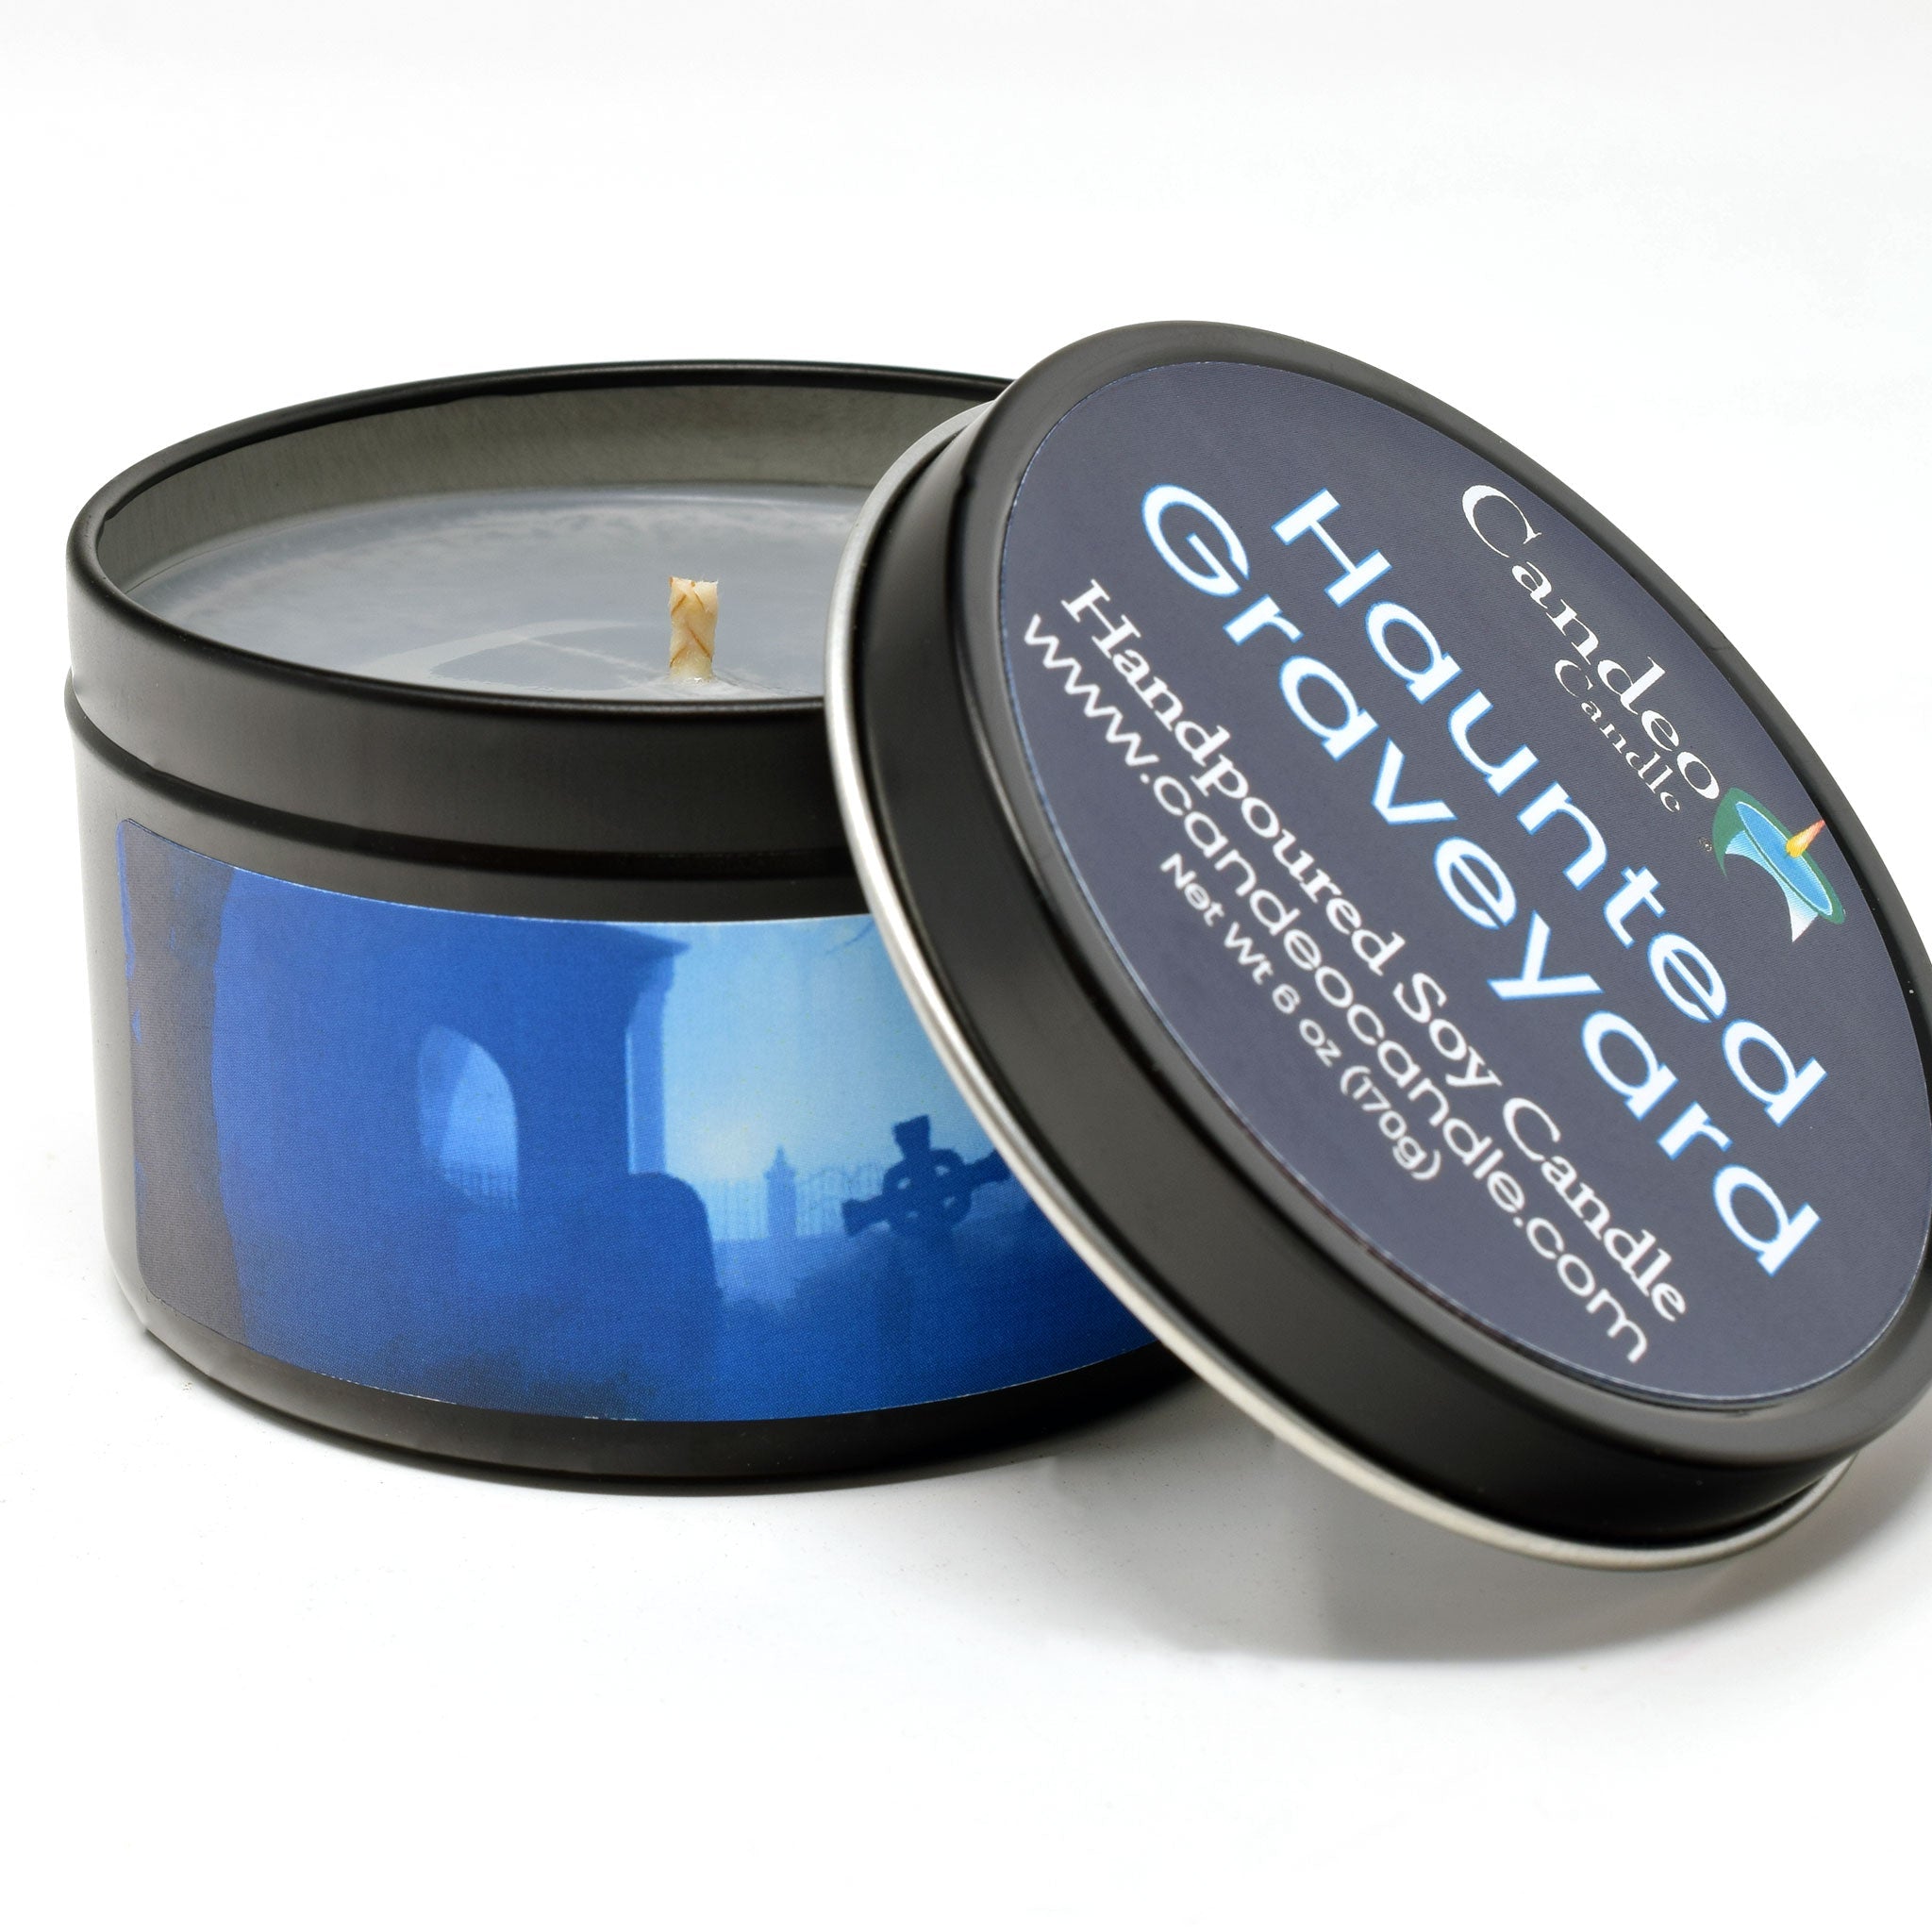 Haunted Graveyard, 6oz Soy Candle Tin - Candeo Candle